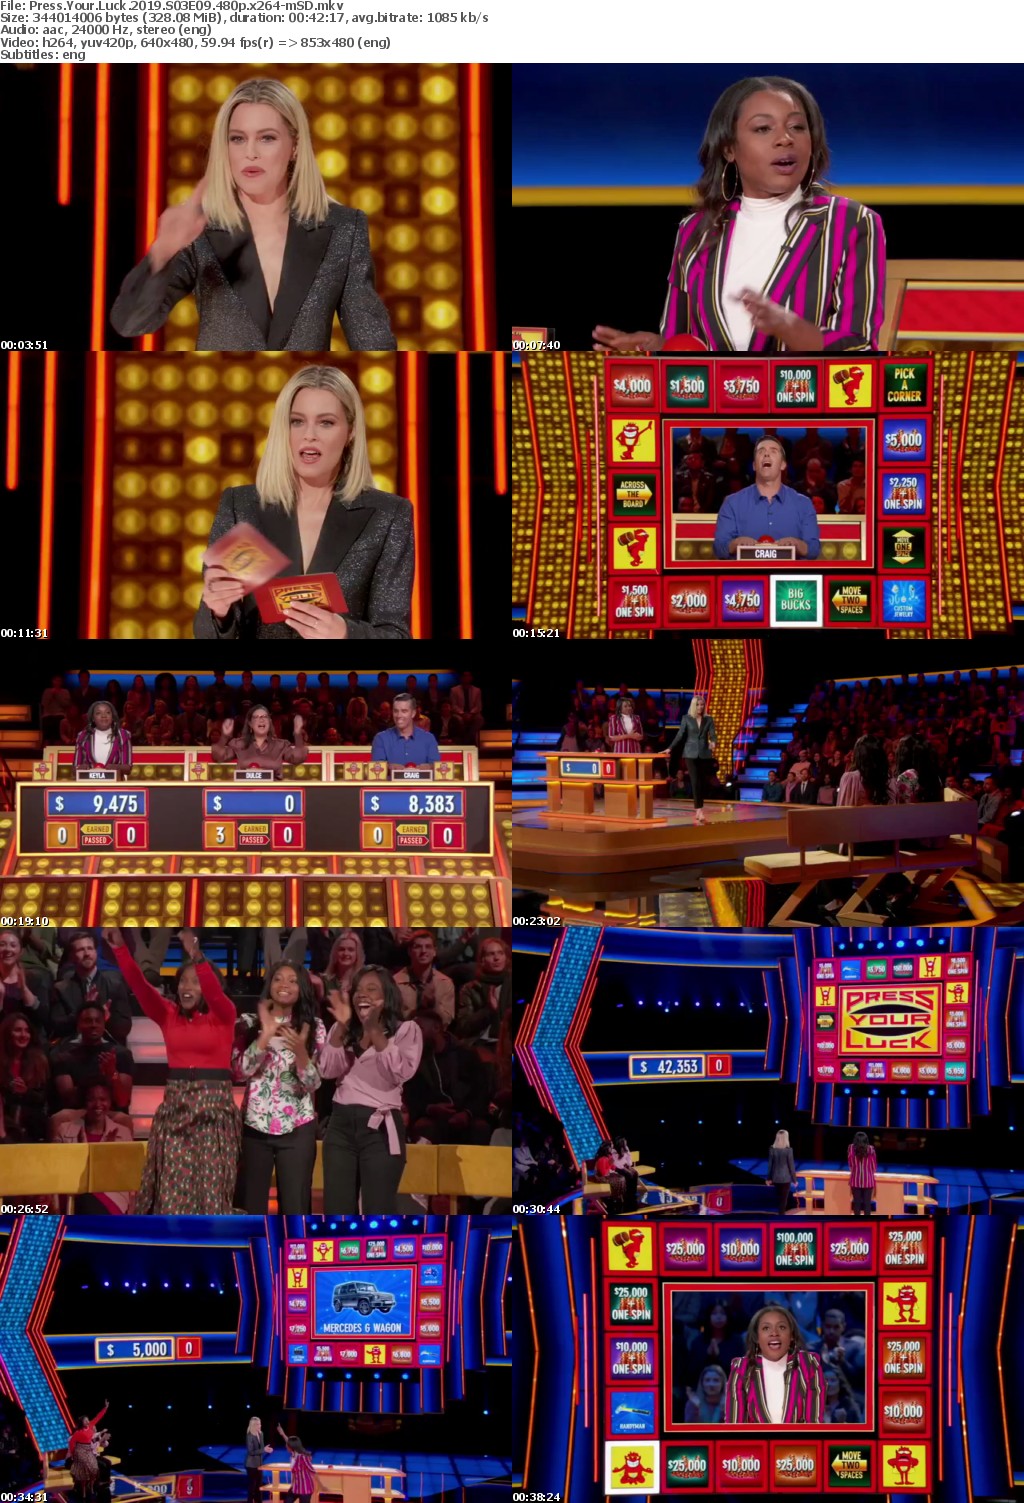 Press Your Luck 2019 S03E09 480p x264-mSD